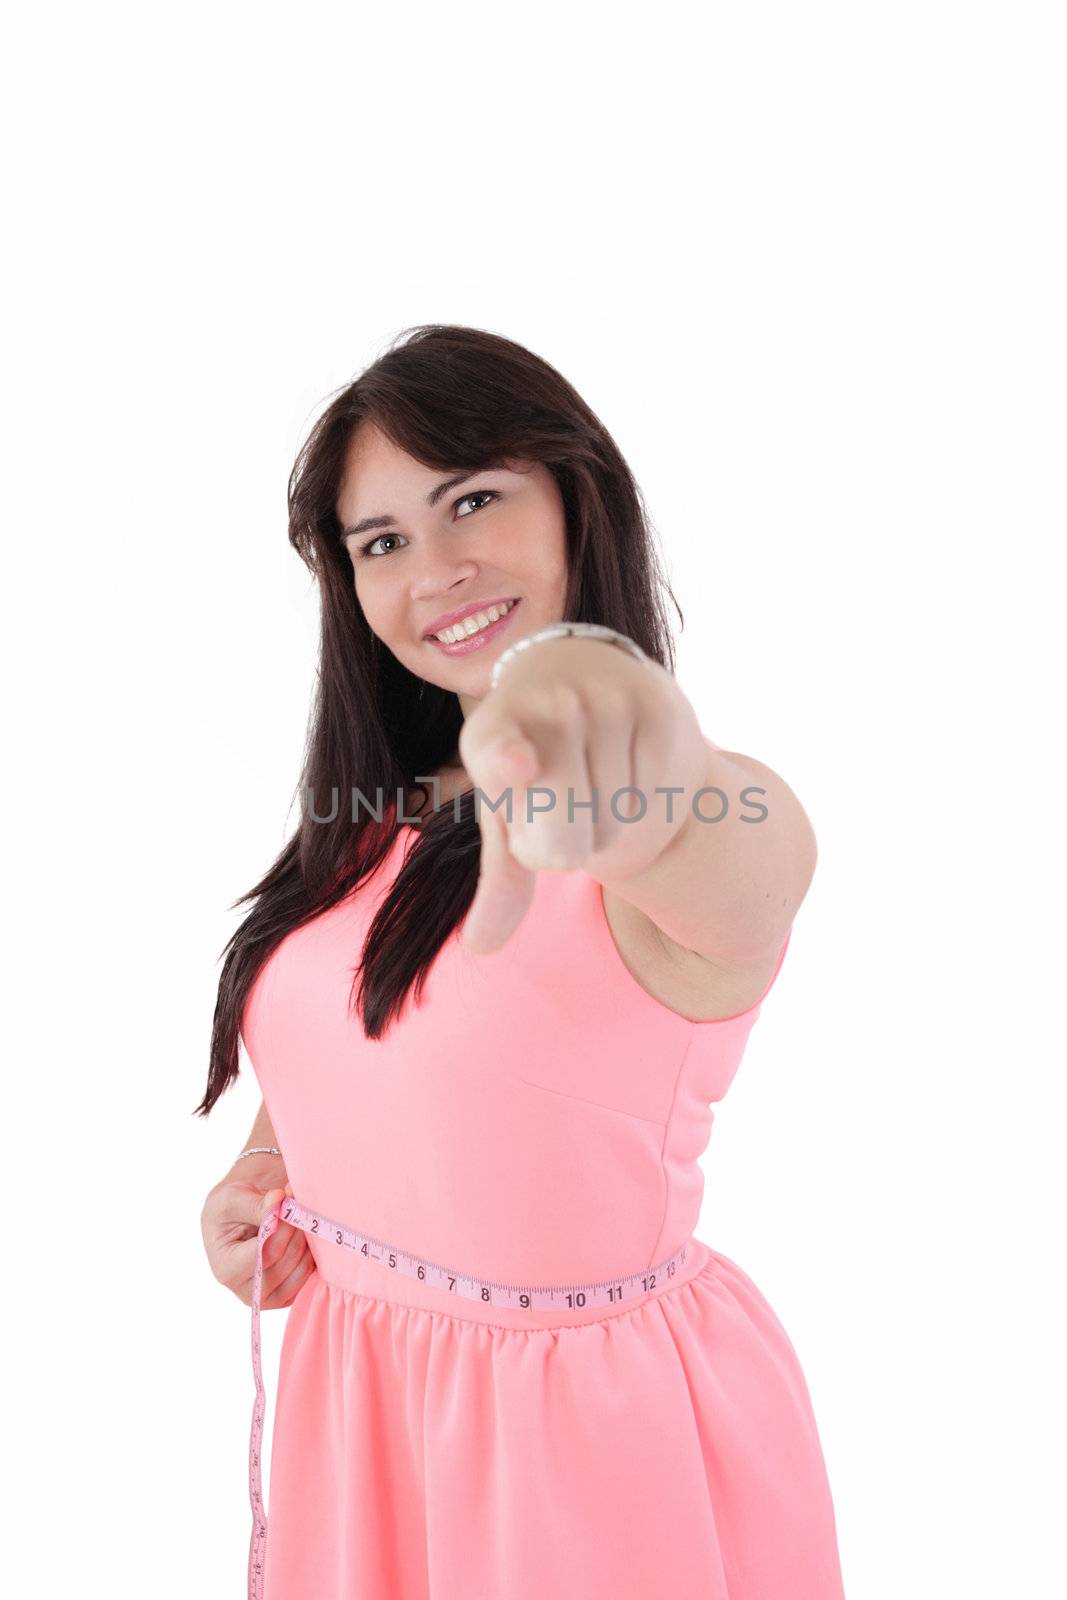 weight loss woman smiling happy excited standing with measuring tape